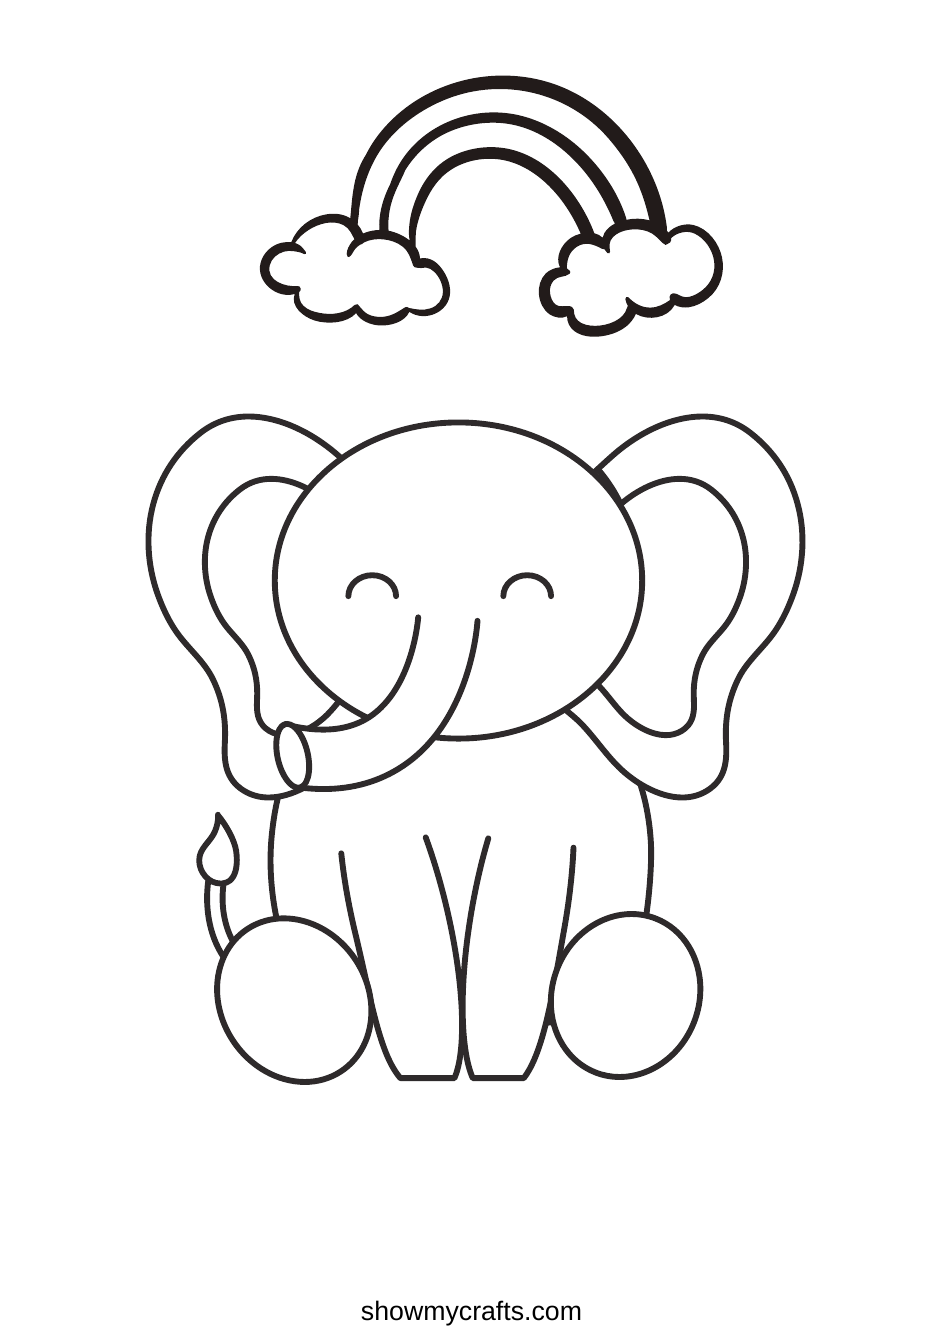 Rainbow Elephant Coloring Page